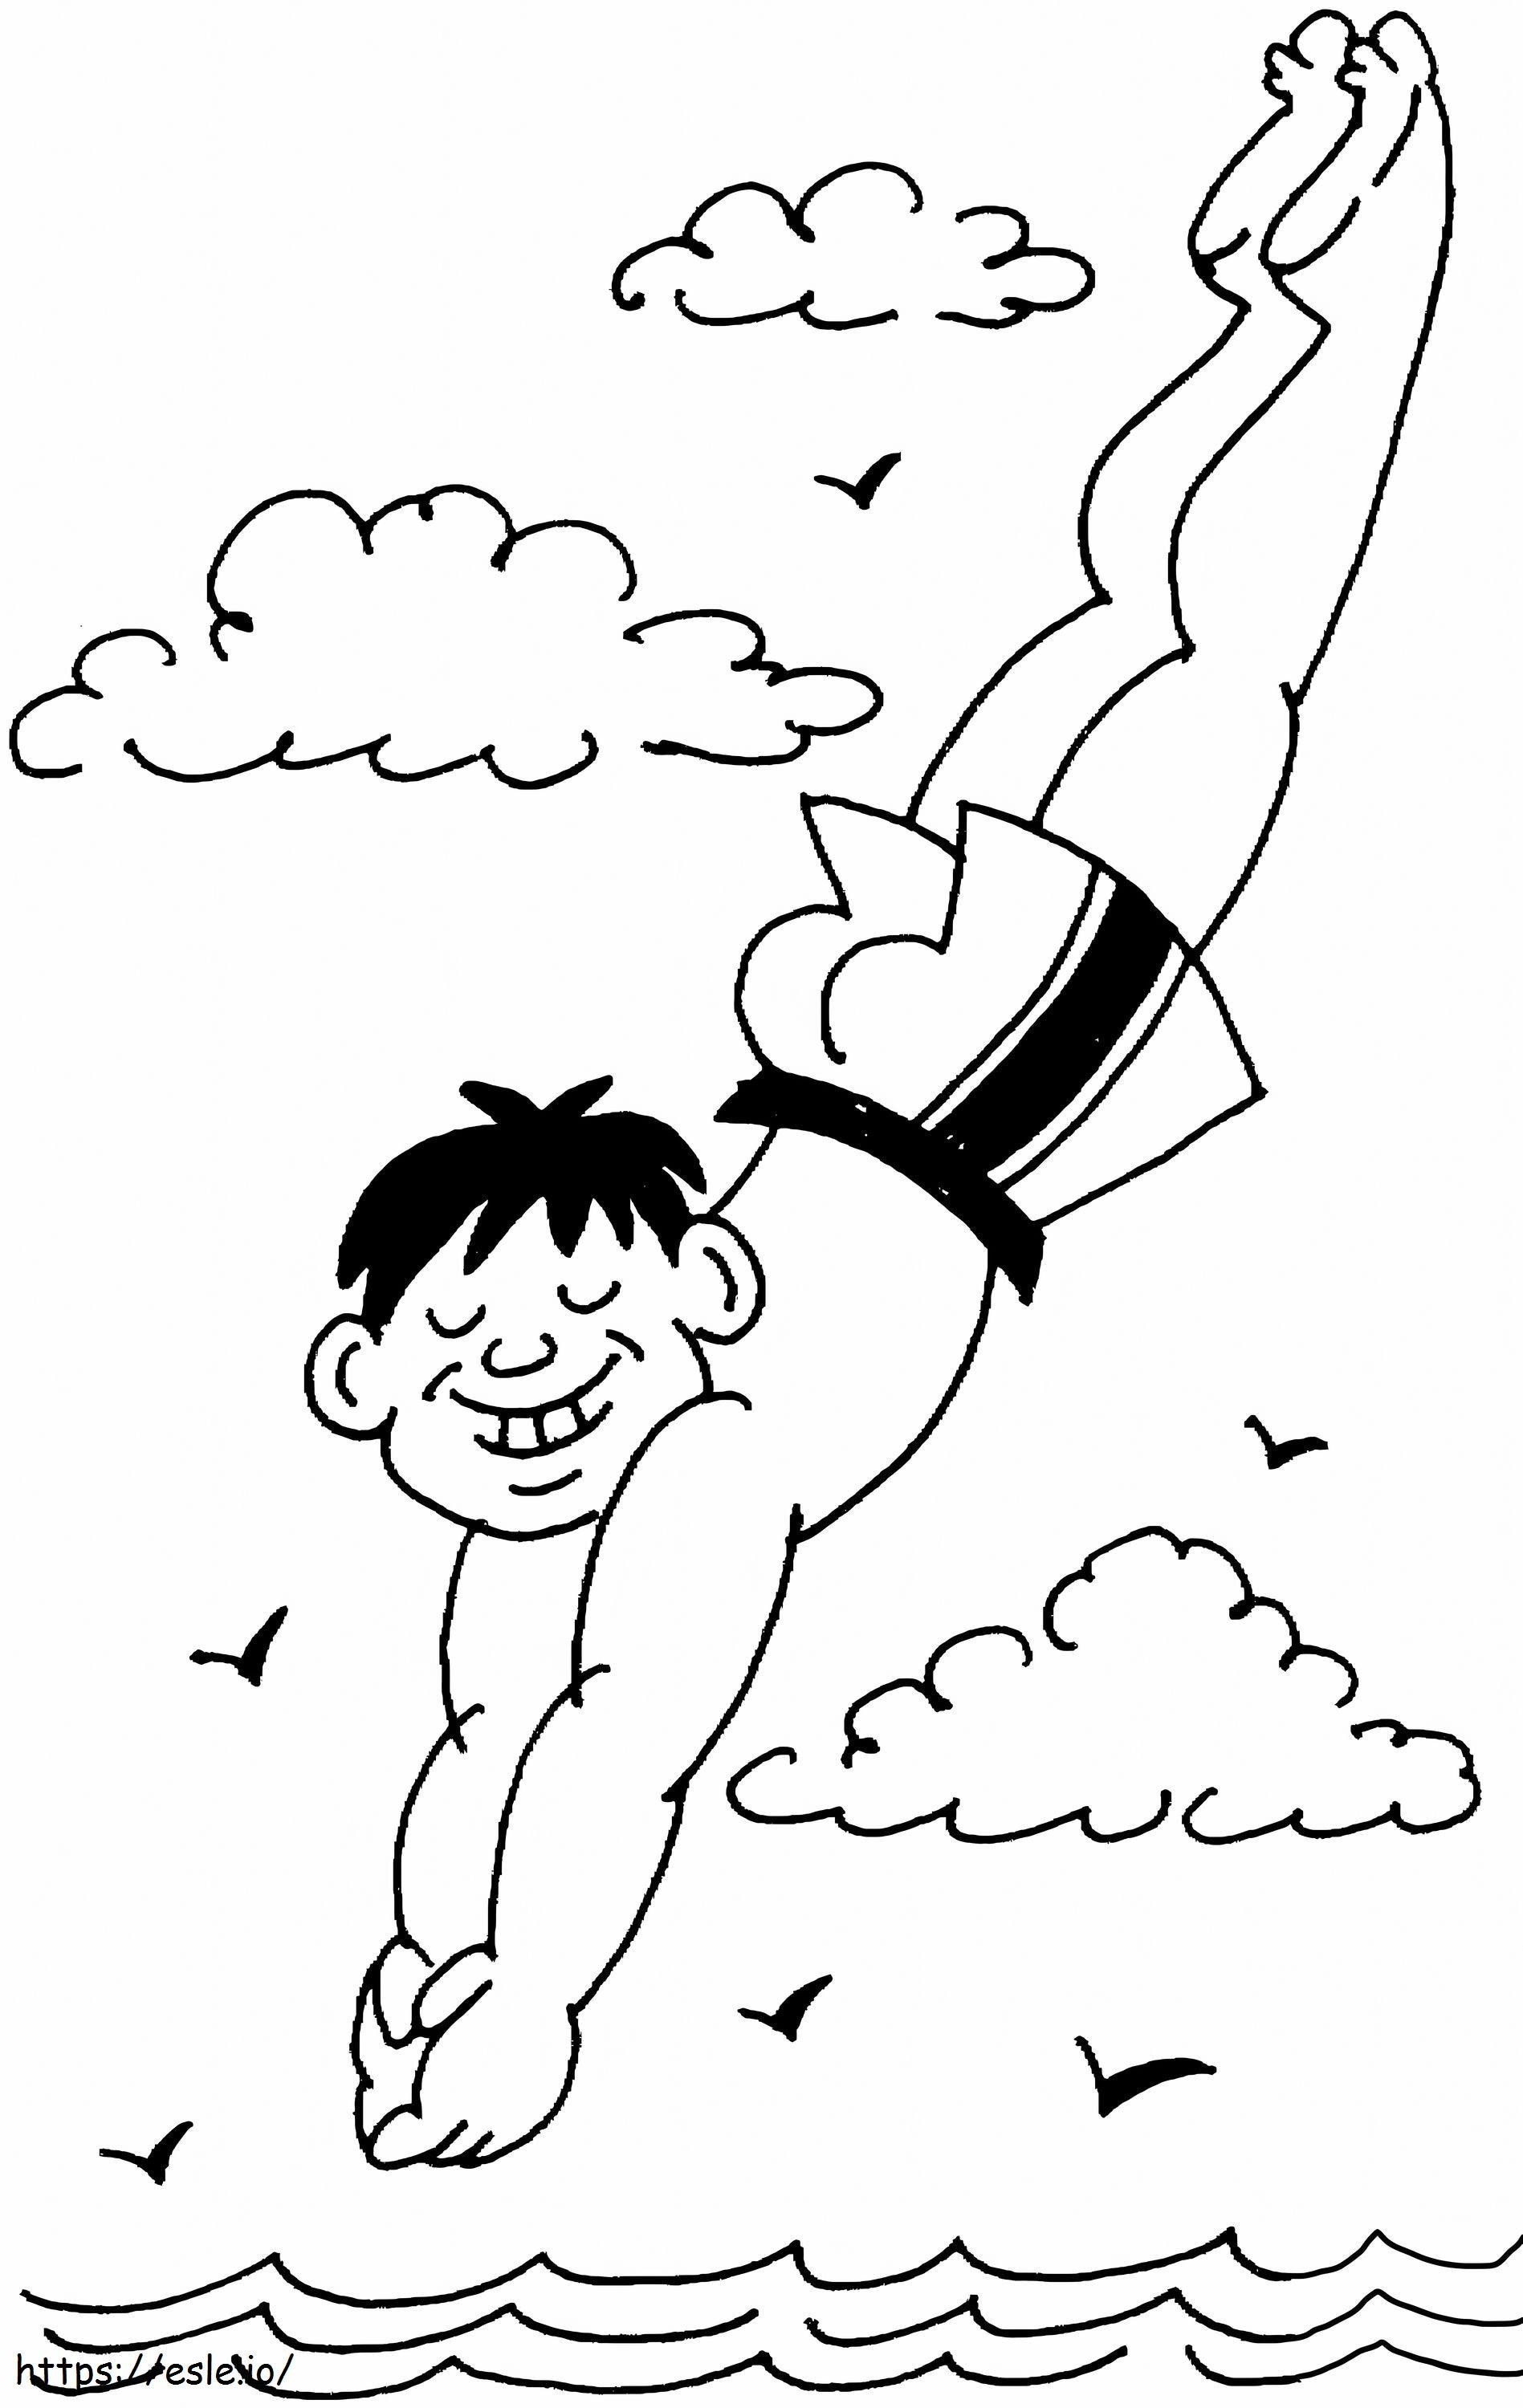 Jumping Boy coloring page